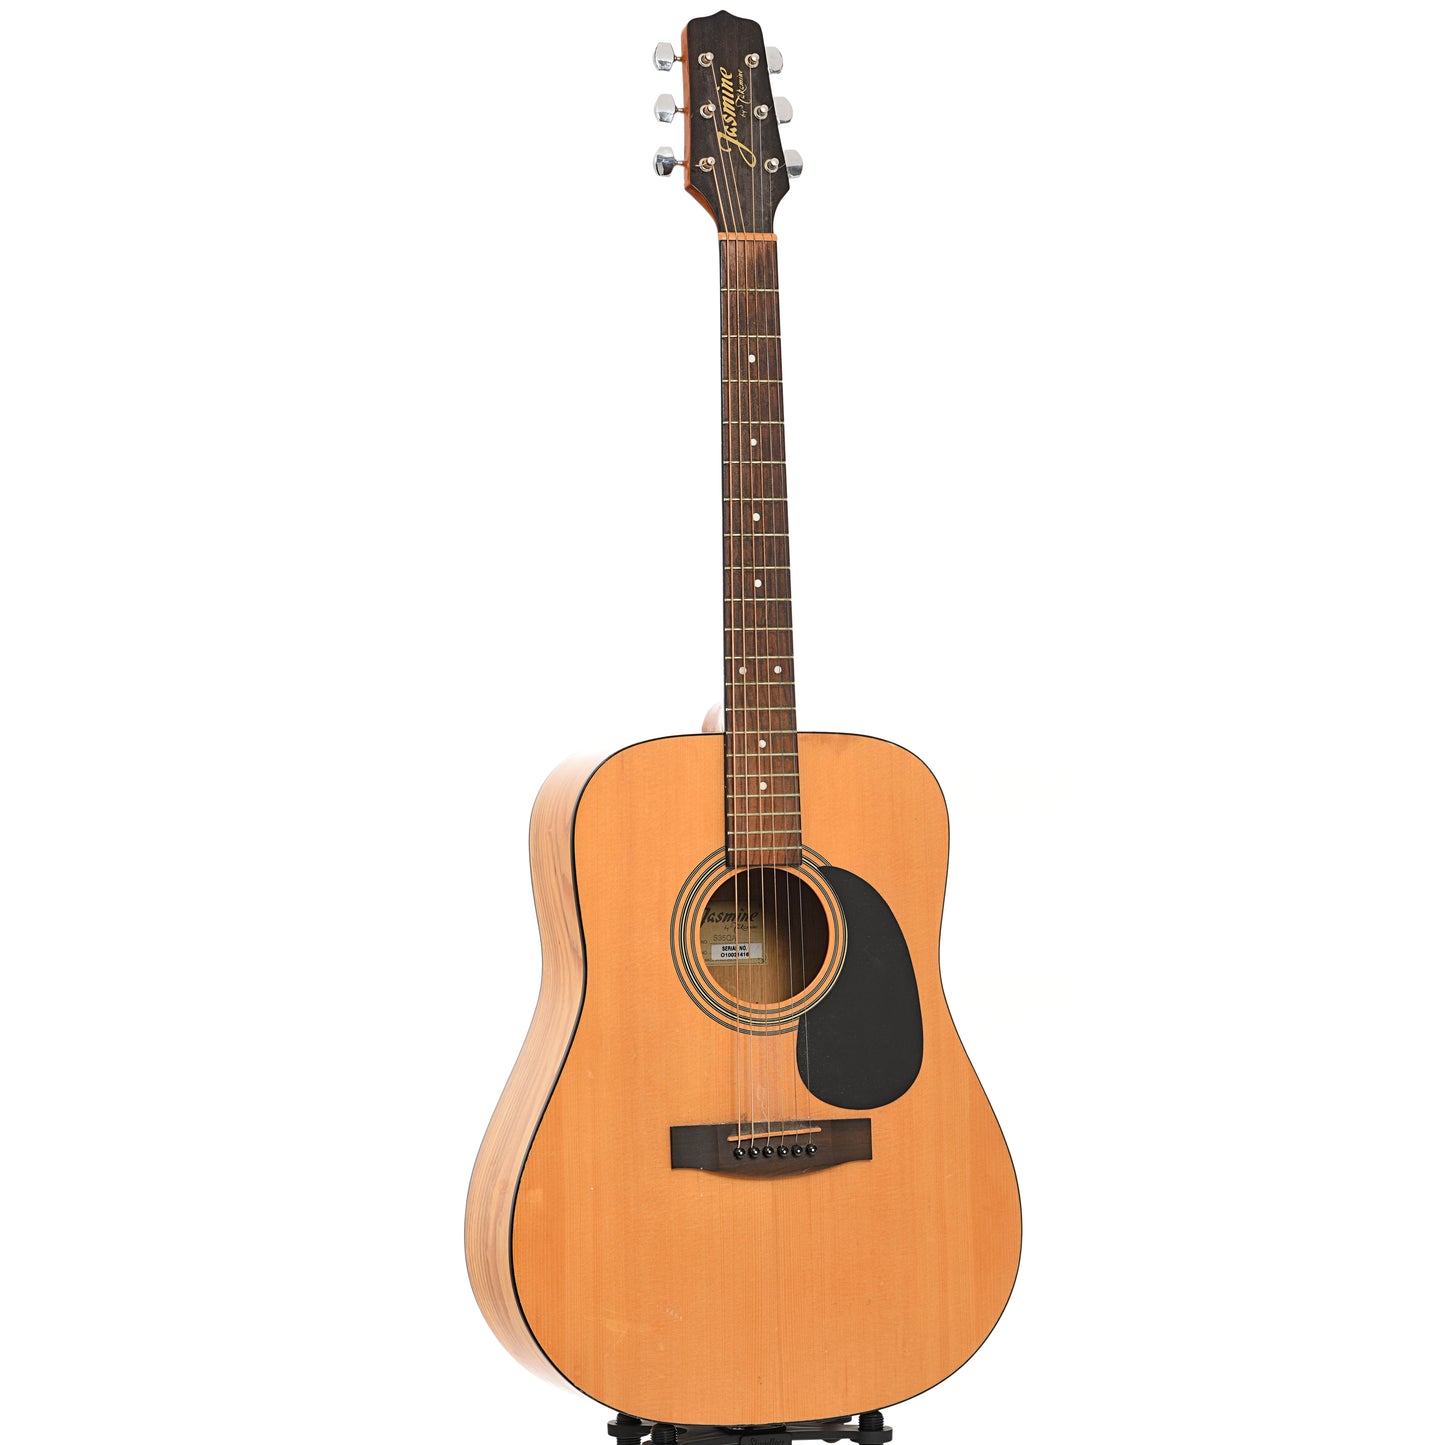 Full front and side of Jasmine S35QA Acoustic Guitar